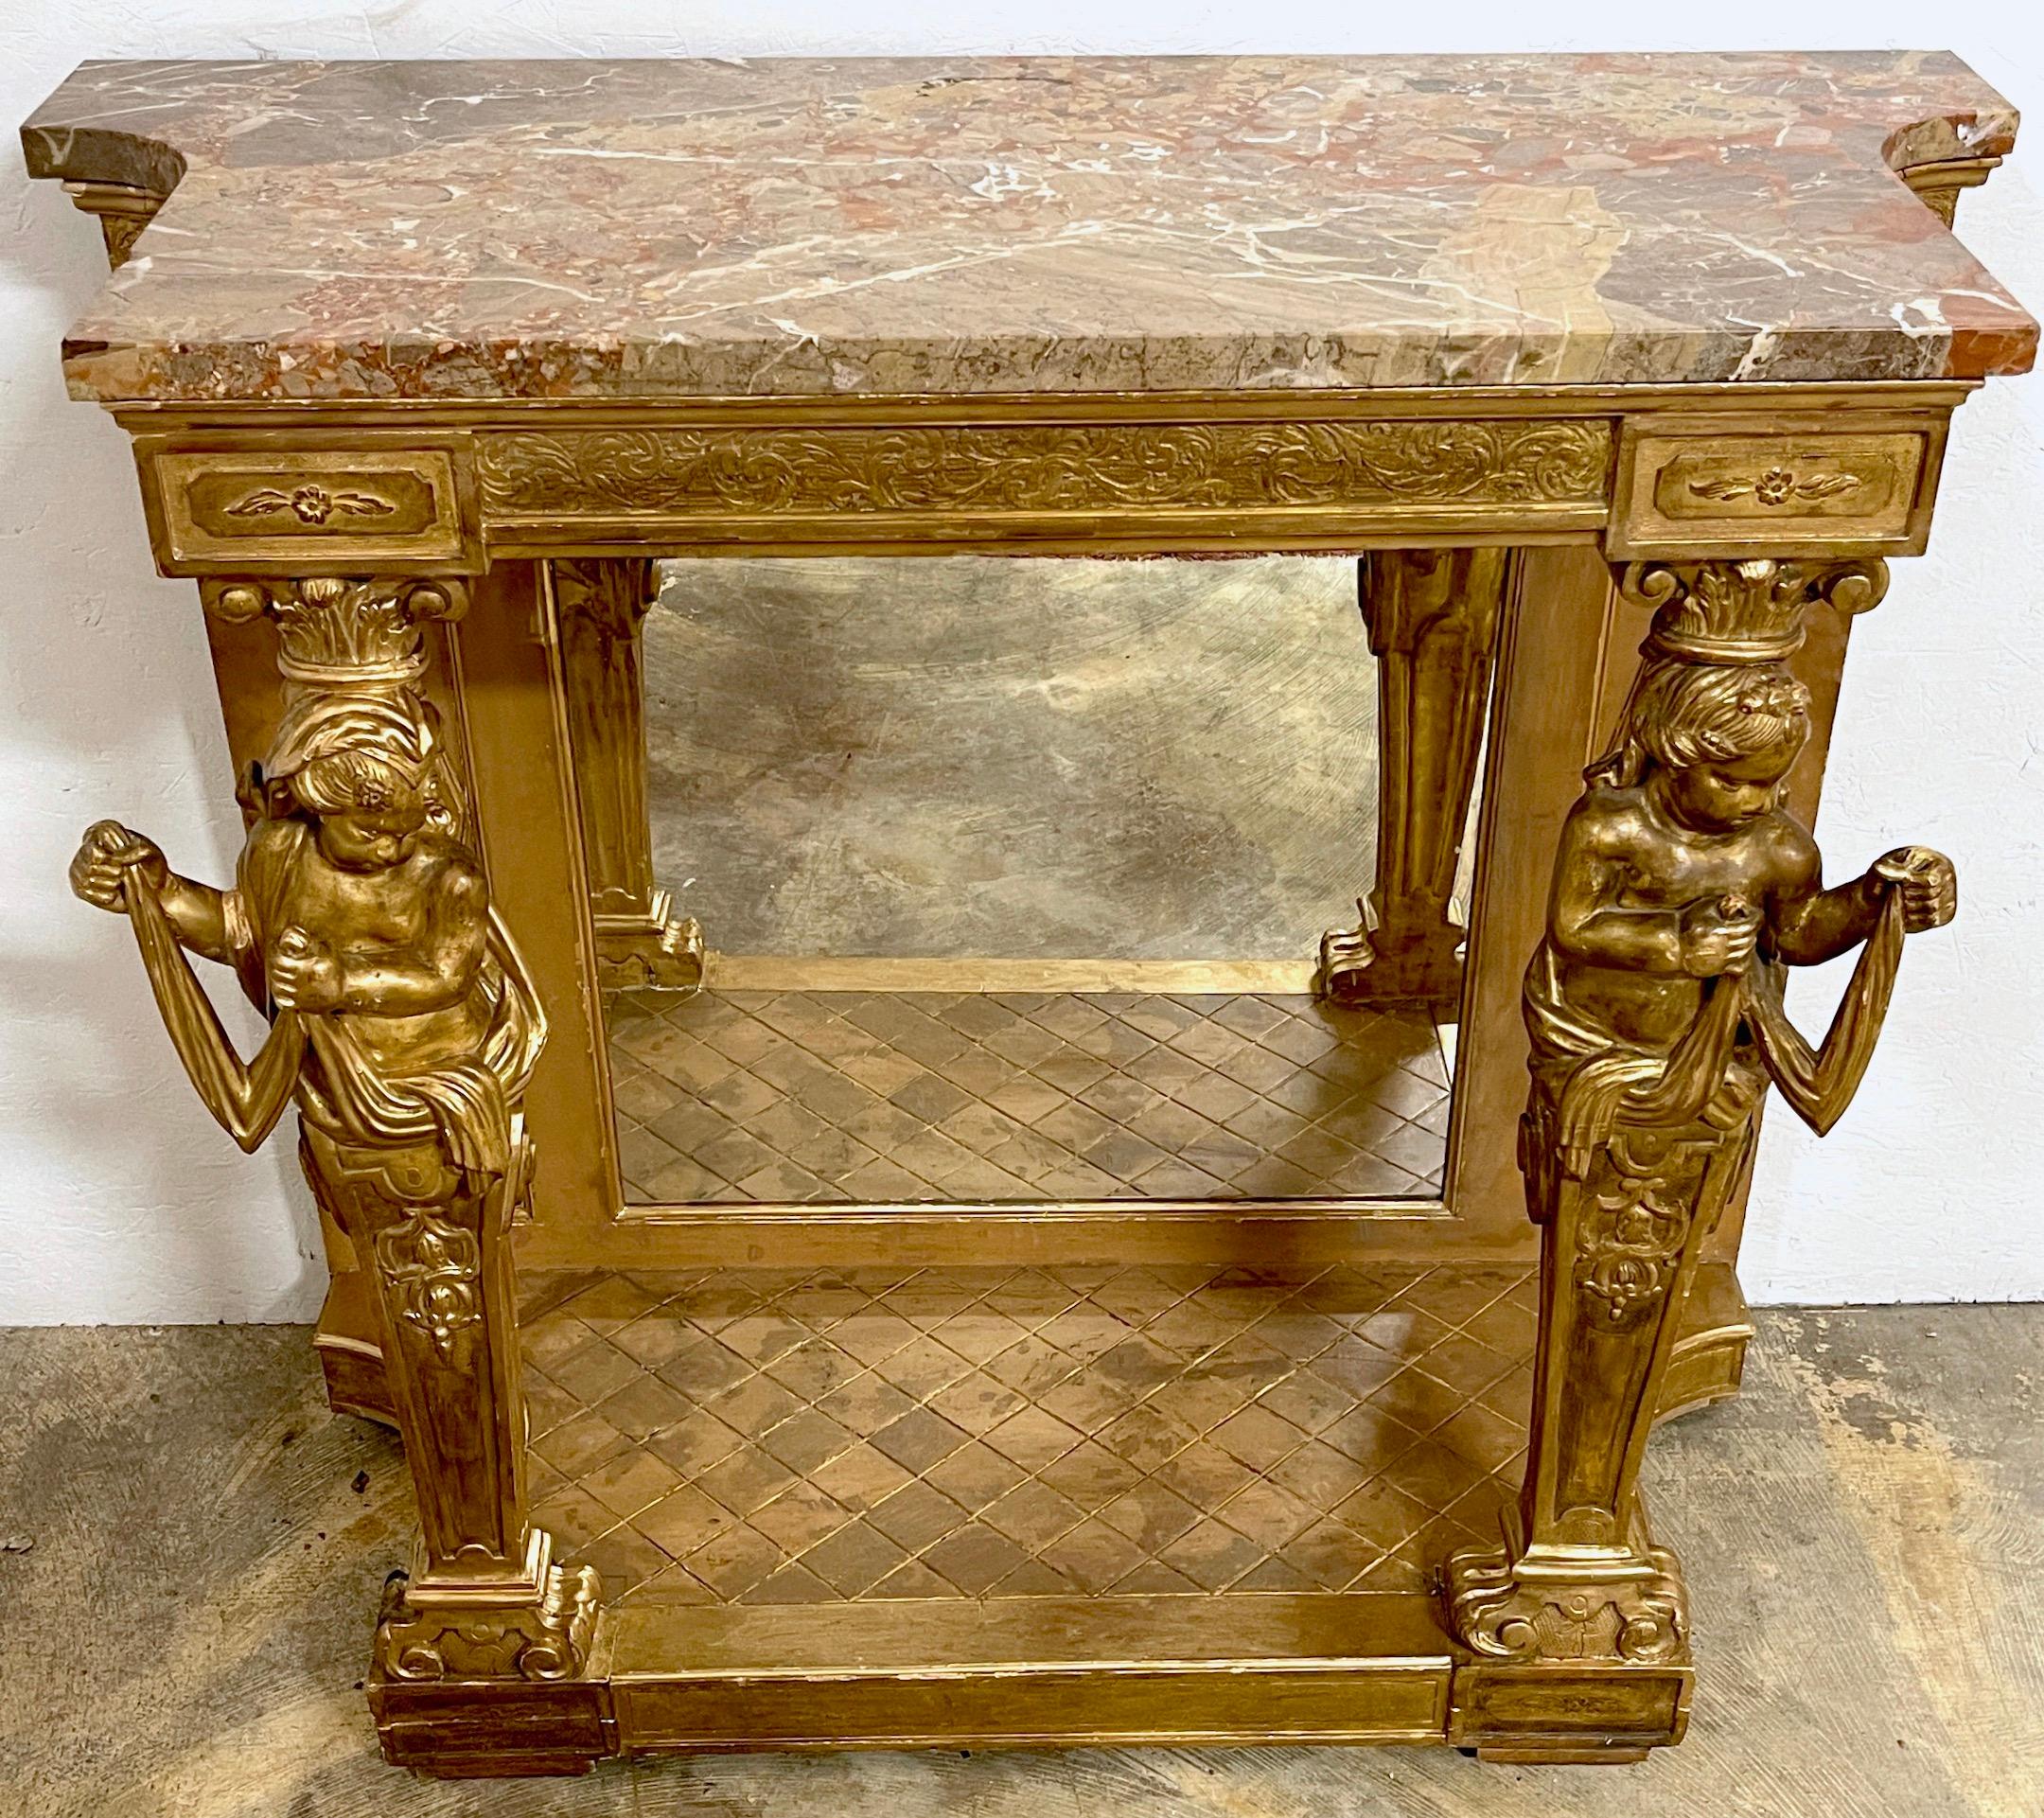 Italian Neoclassical Breccia Viola Marble & Giltwood Figural Console 
Italy, Mid-19th Century 

Of good size, this is an excellent example of 19th century Neapolitan furniture. The top fitted with a specimen carved and canted Breccia Viola marble